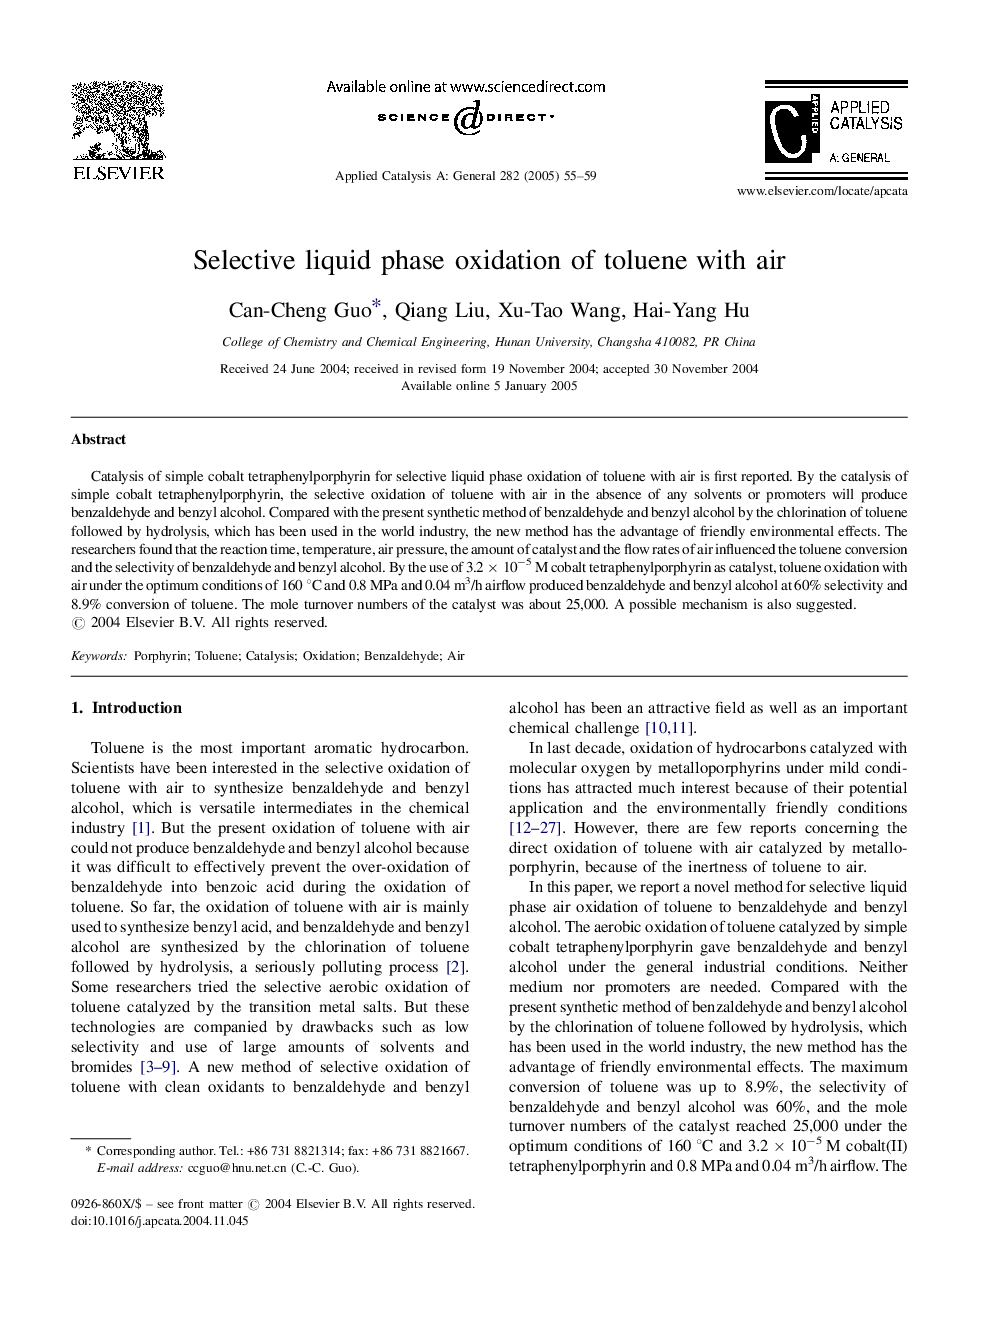 Selective liquid phase oxidation of toluene with air